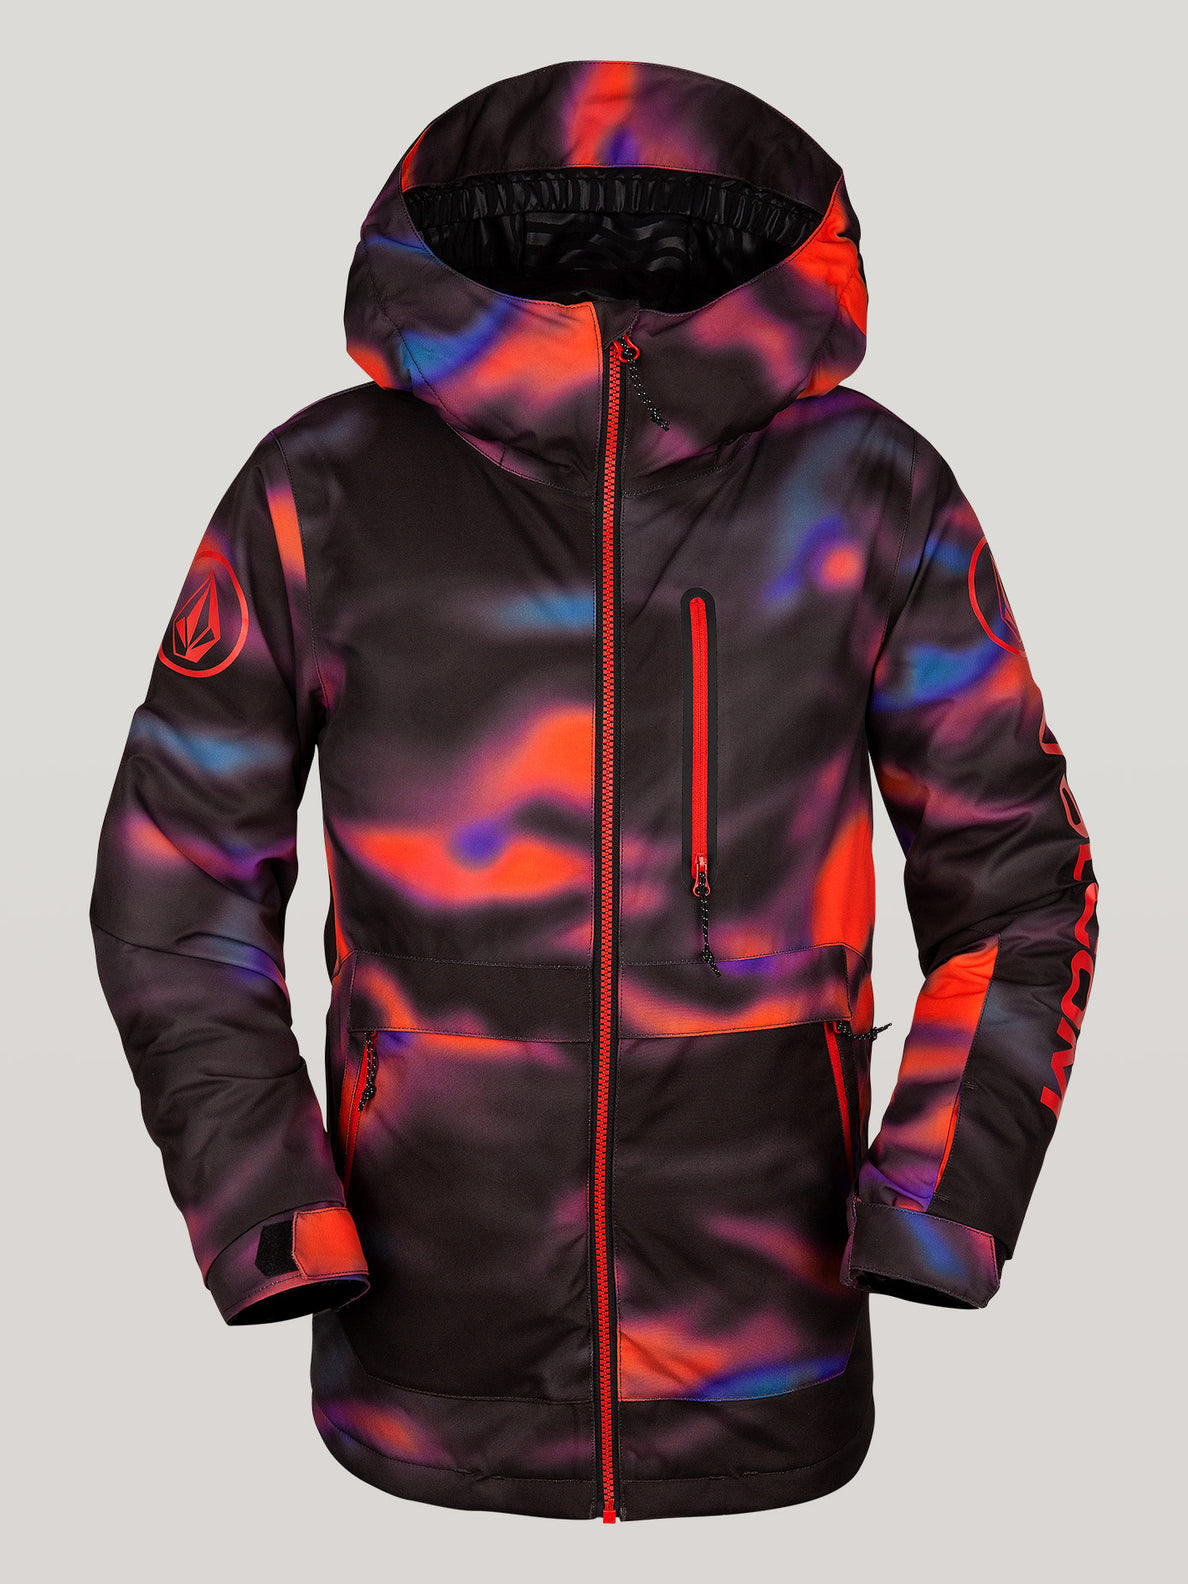 Boys Youth Holbeck Insulated Jacket - Multi